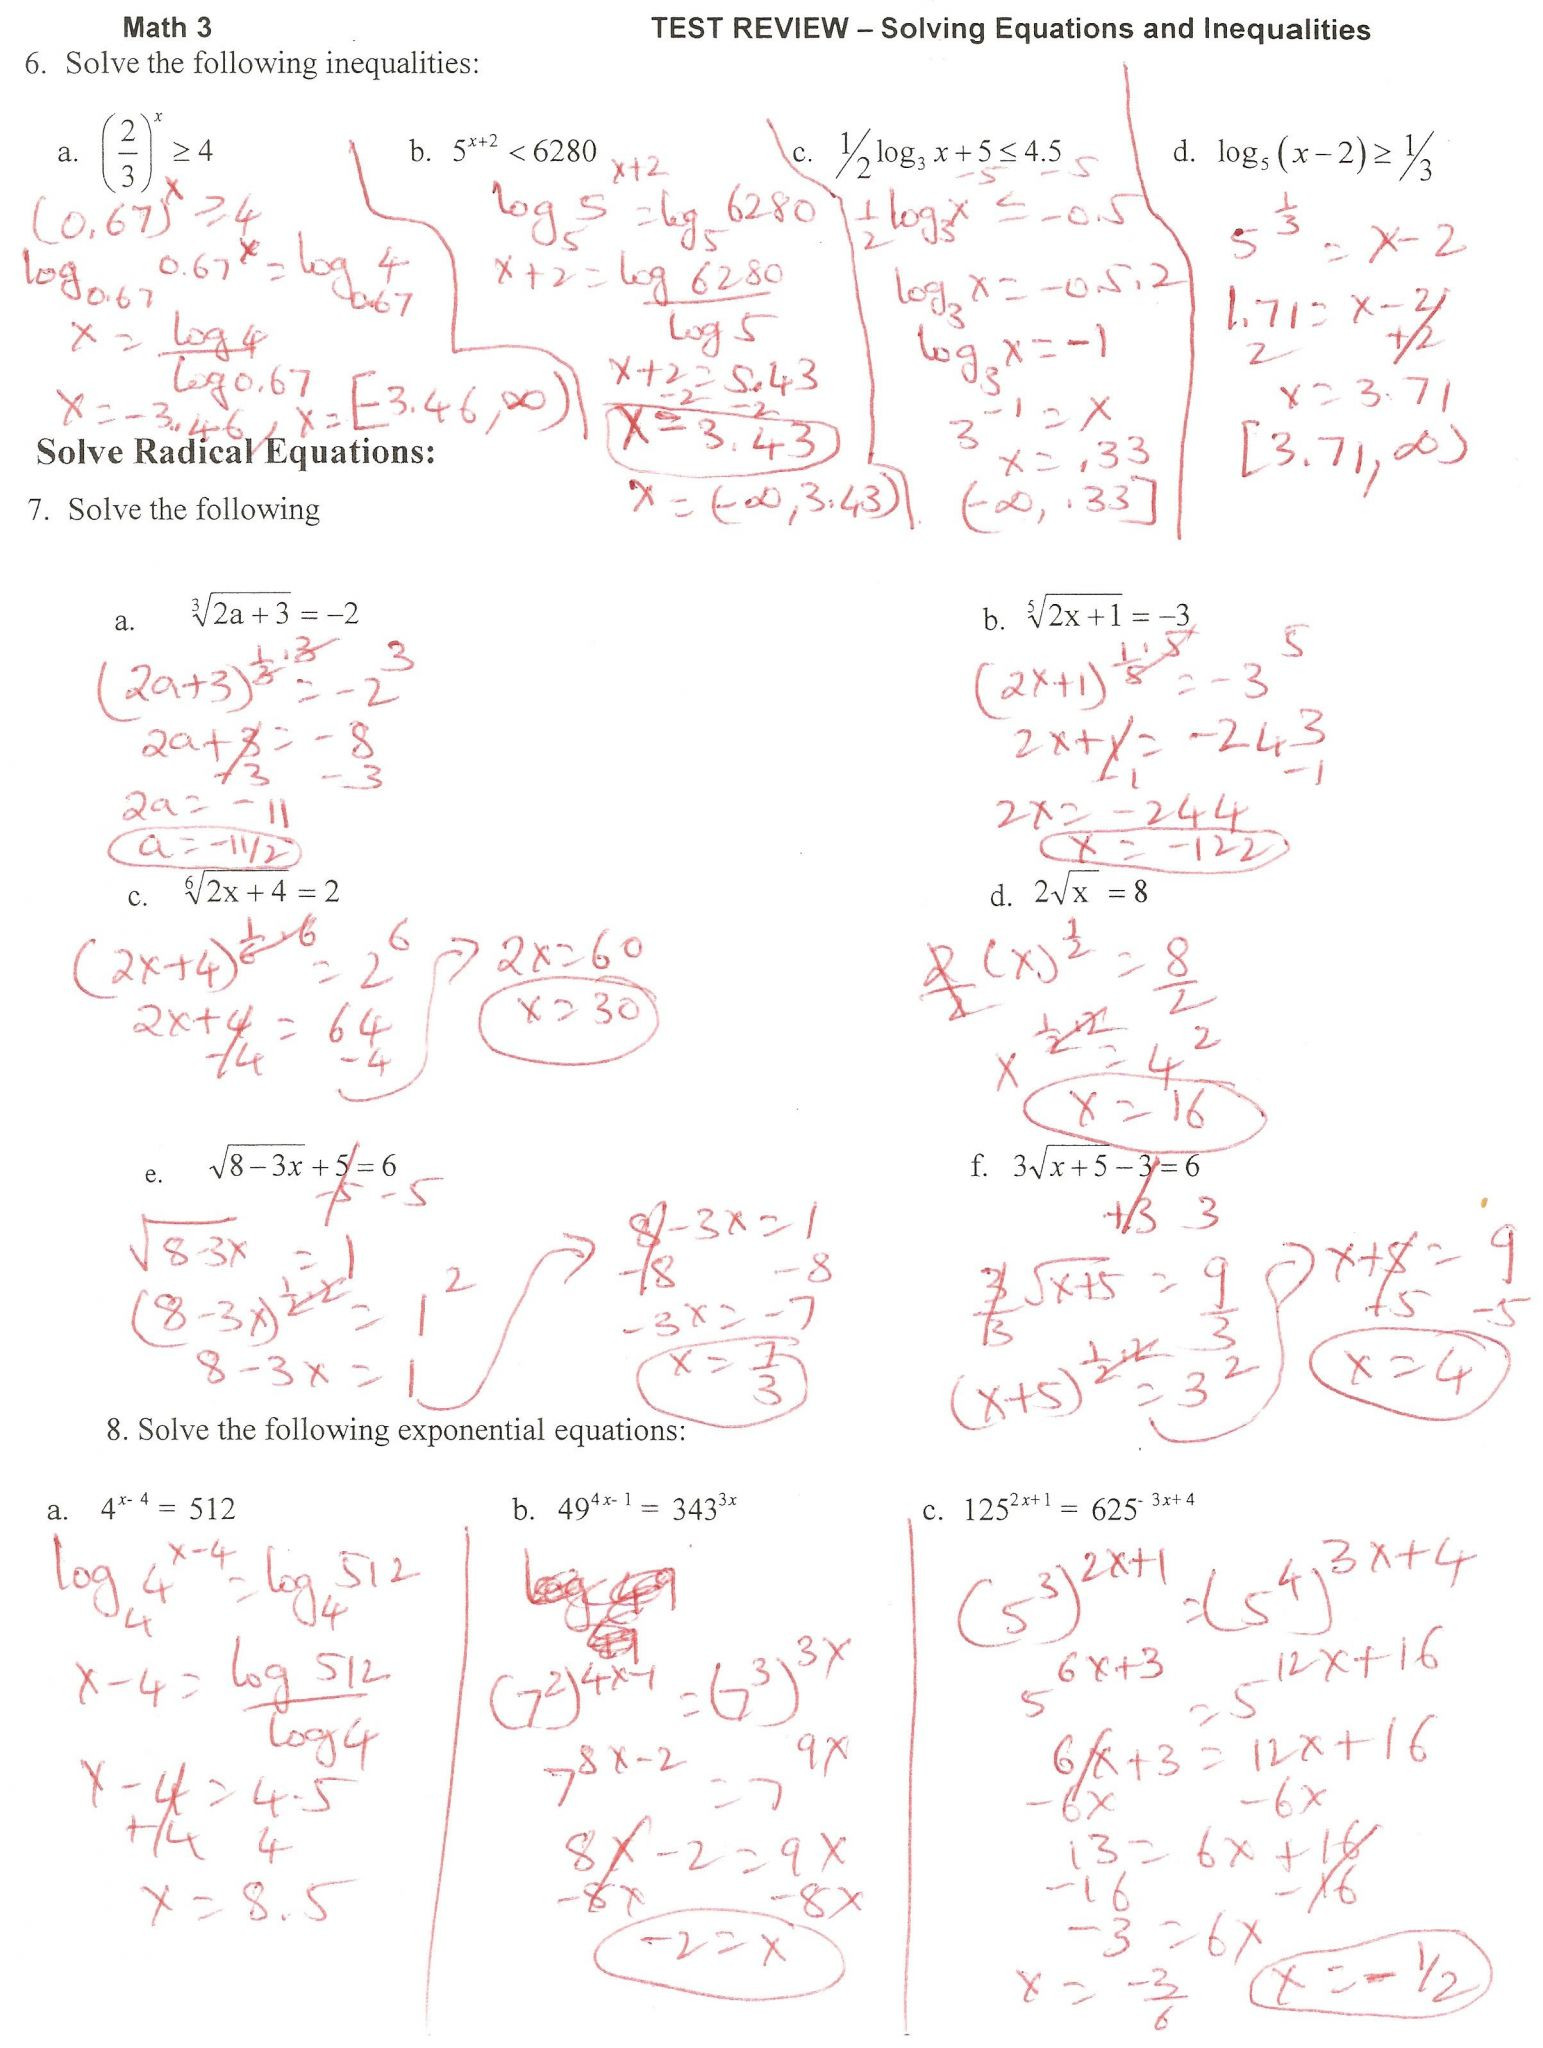 Inequalities Worksheet with Answers 7 solving Radical Equations and Inequalities Worksheet